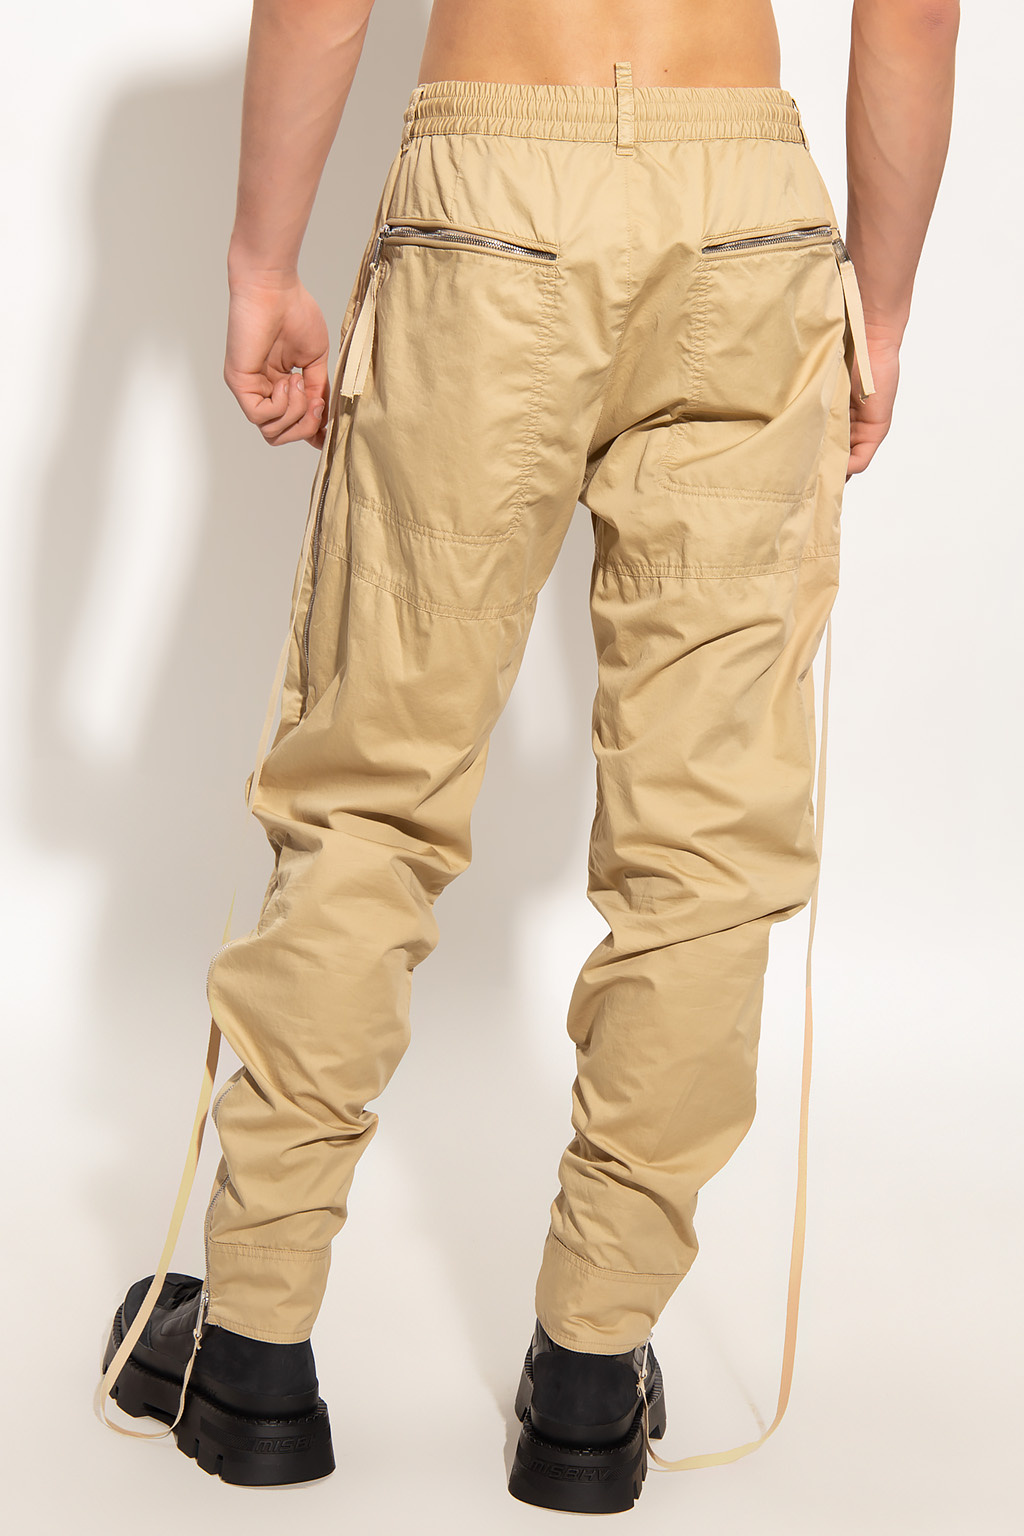 Dsquared2 Trousers with multiple pockets